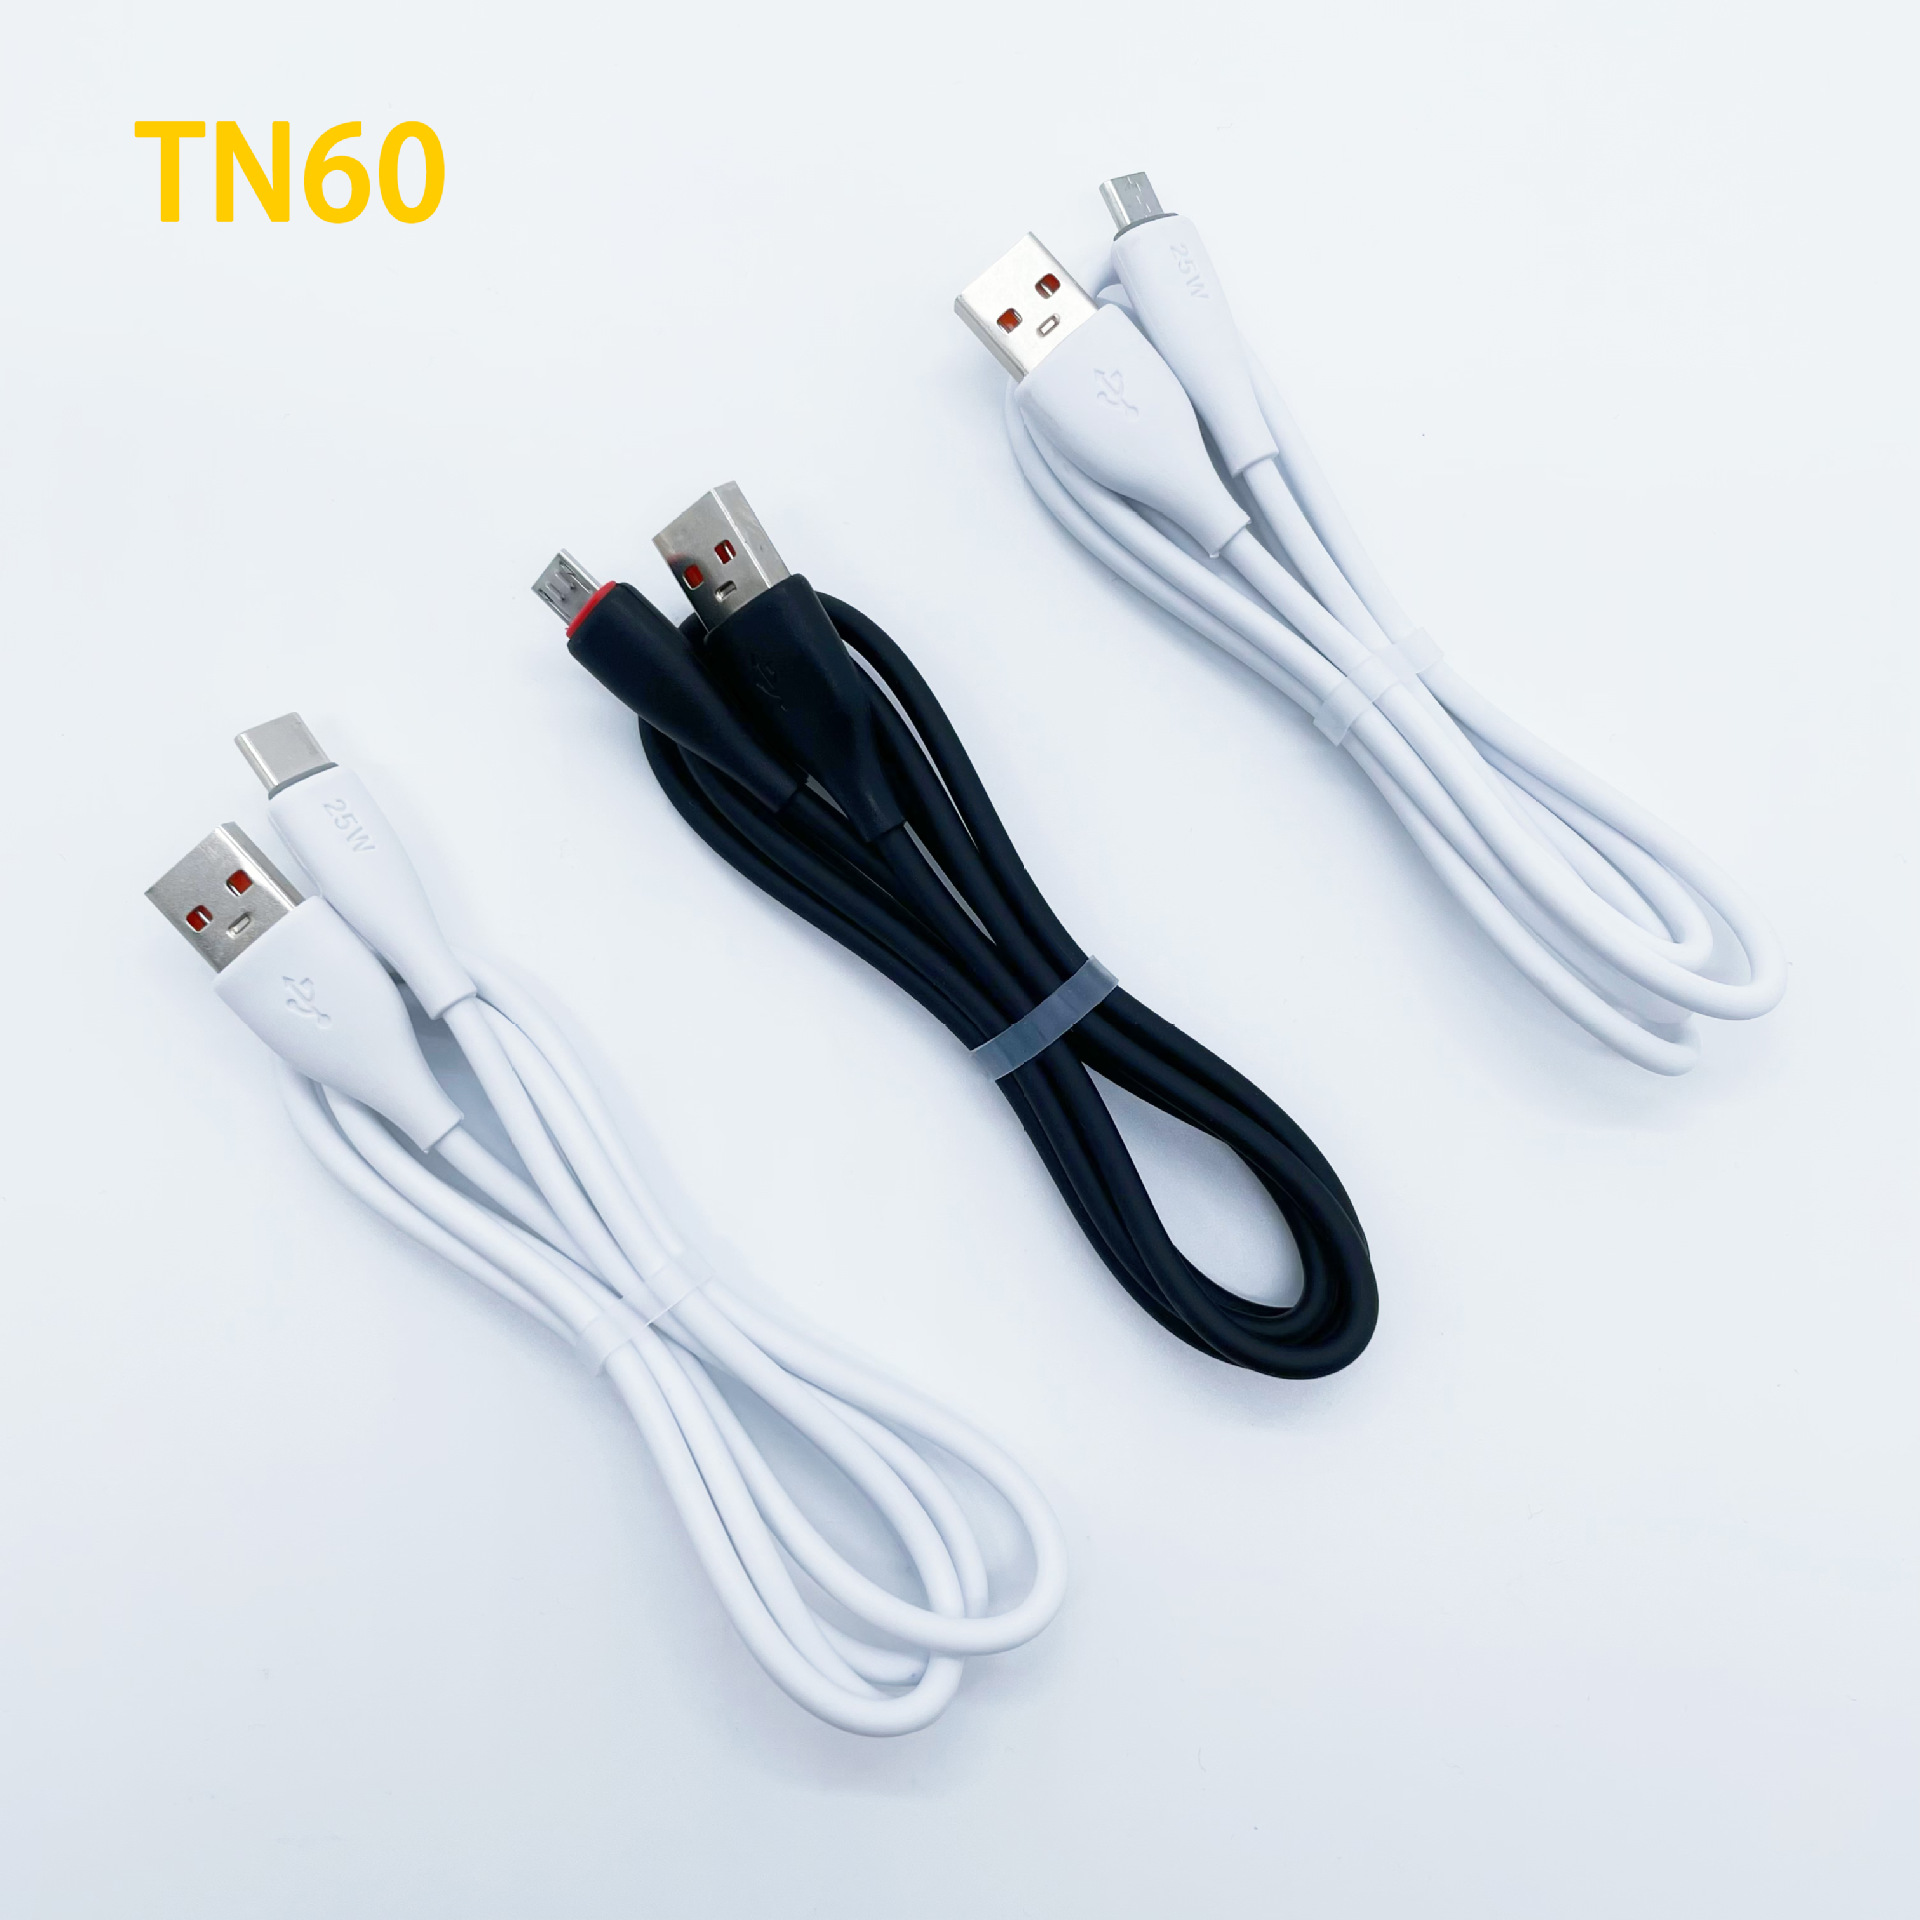 Tn60 New PVC Fast Charge Data Cable Support I5 Android TC Smartphone Qc3.0 Function Delivery Supported